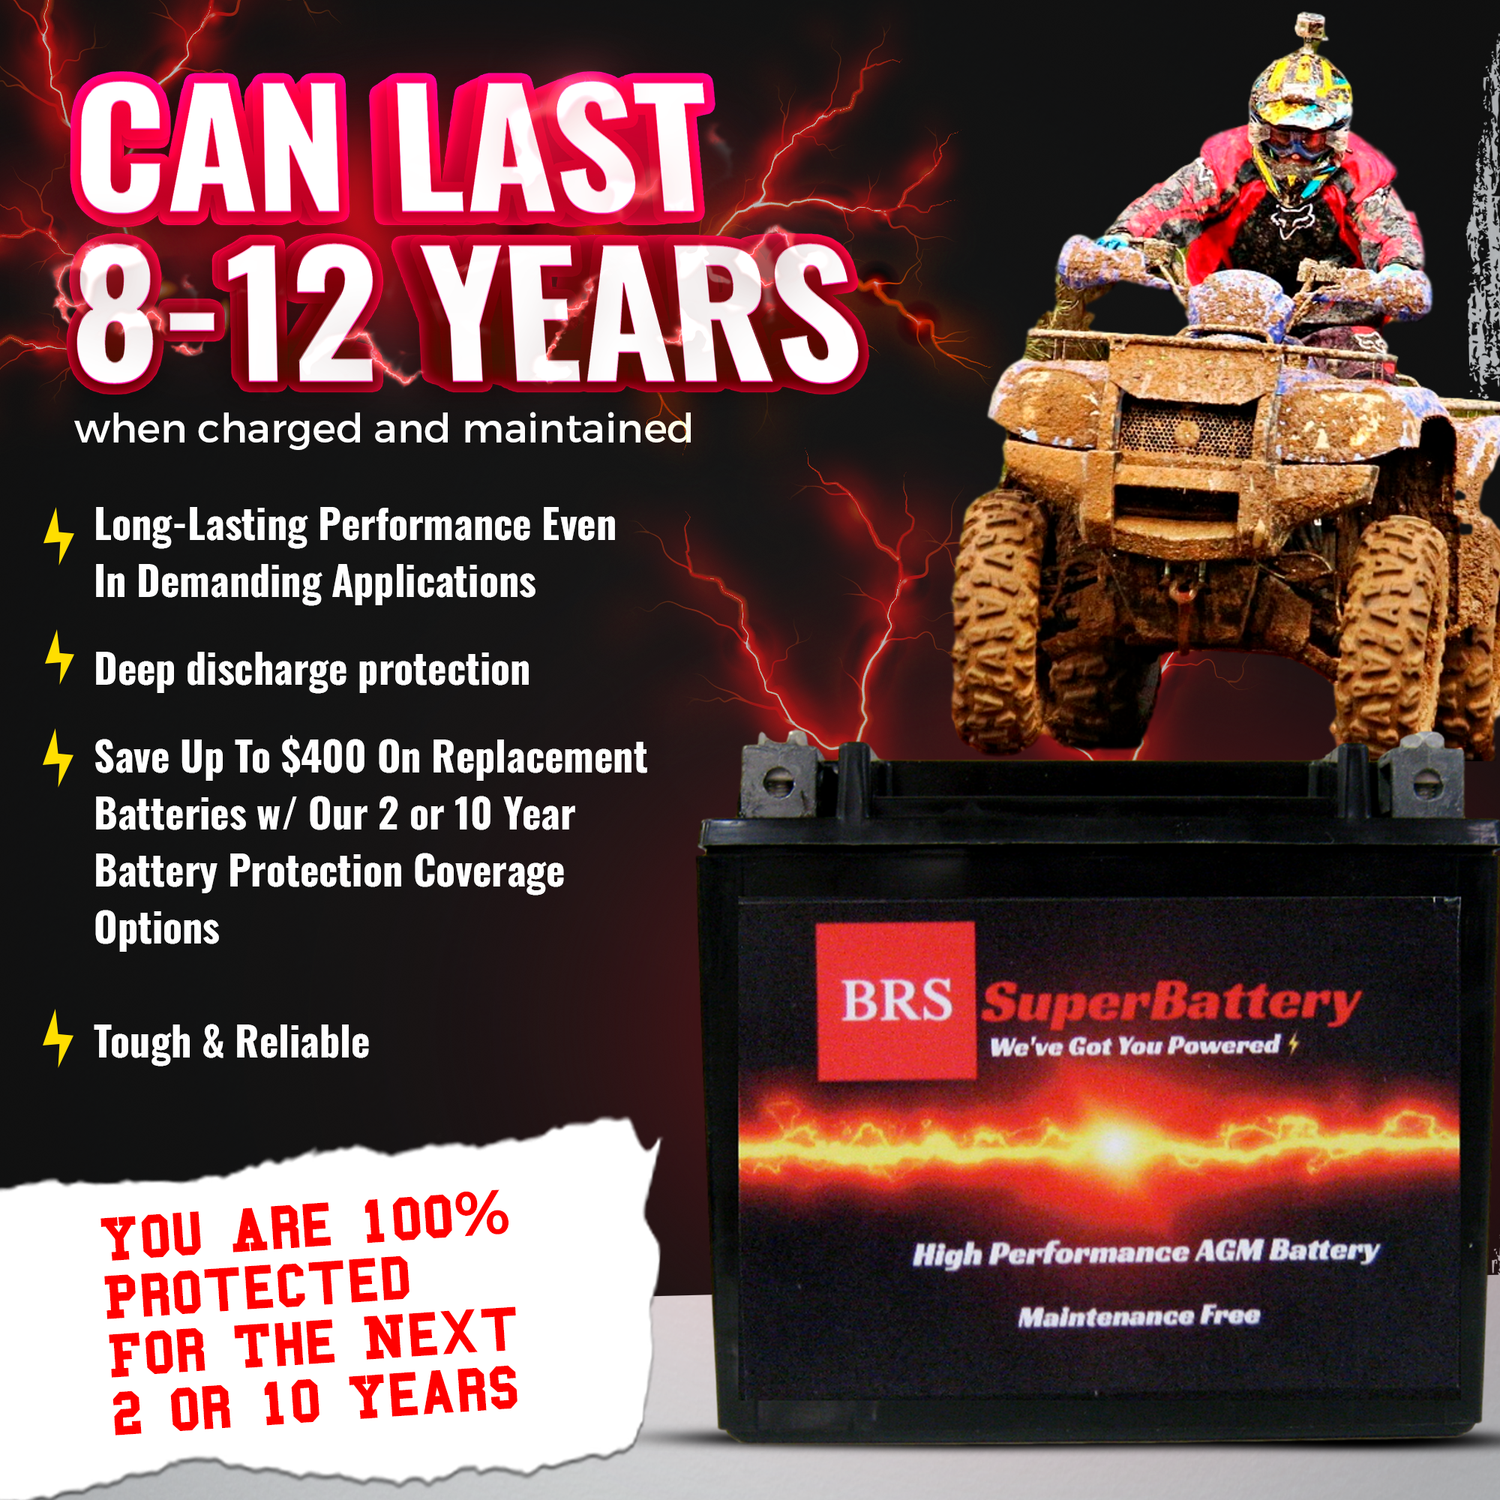 BRS14AH-BS 12v High Performance Sealed AGM PowerSport 2 Year Battery - BRS Super Battery